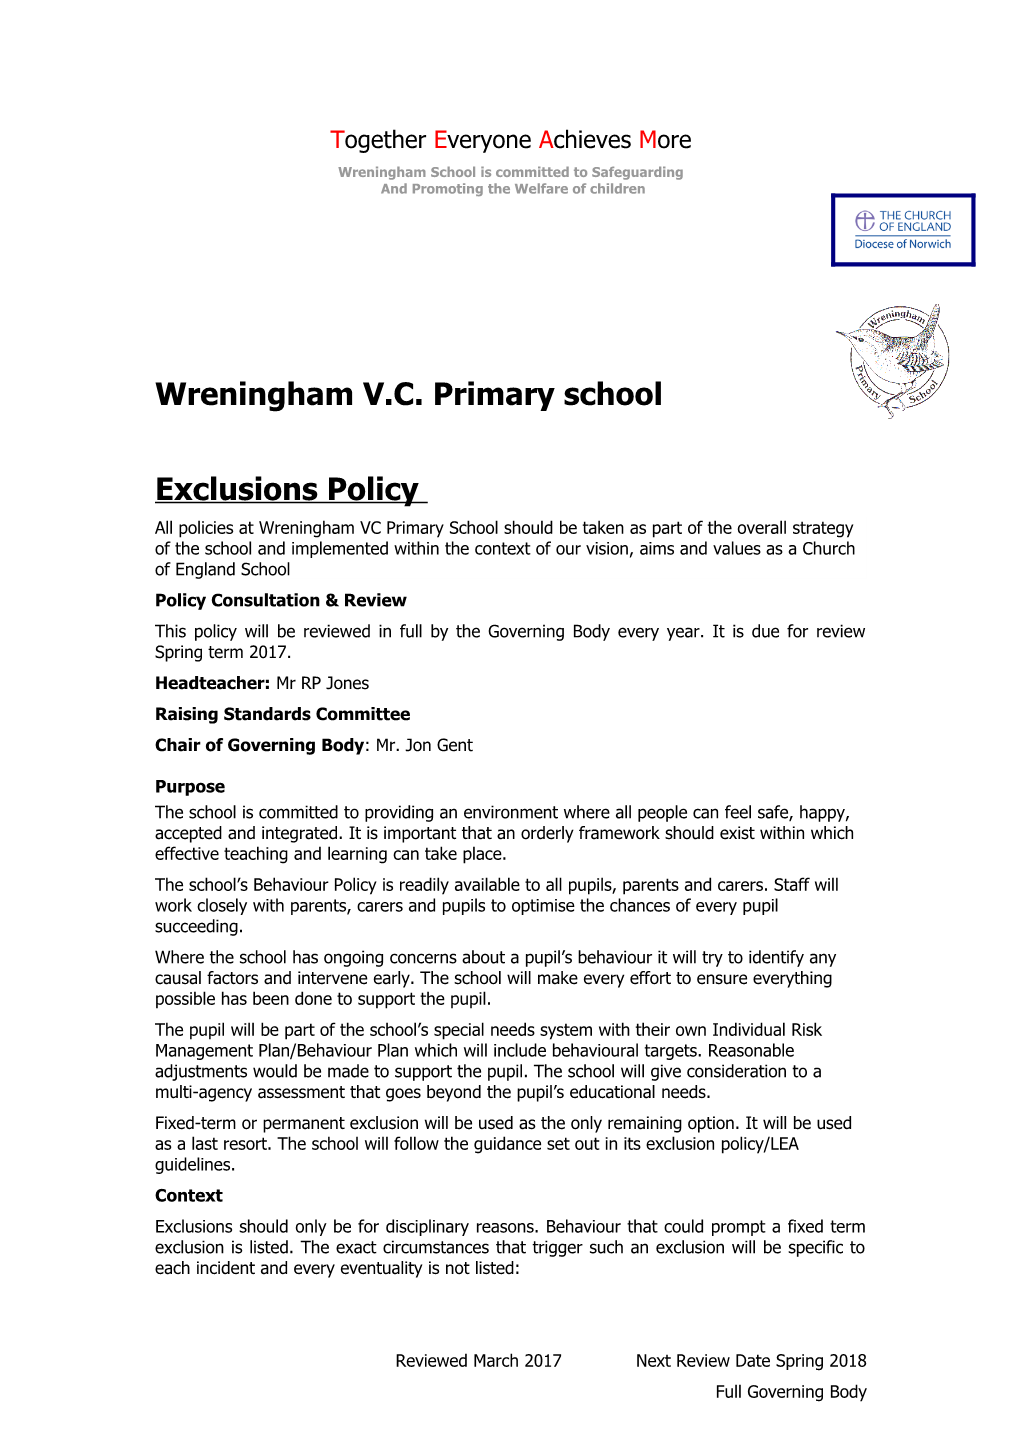 Wreningham School Is Committed to Safeguarding